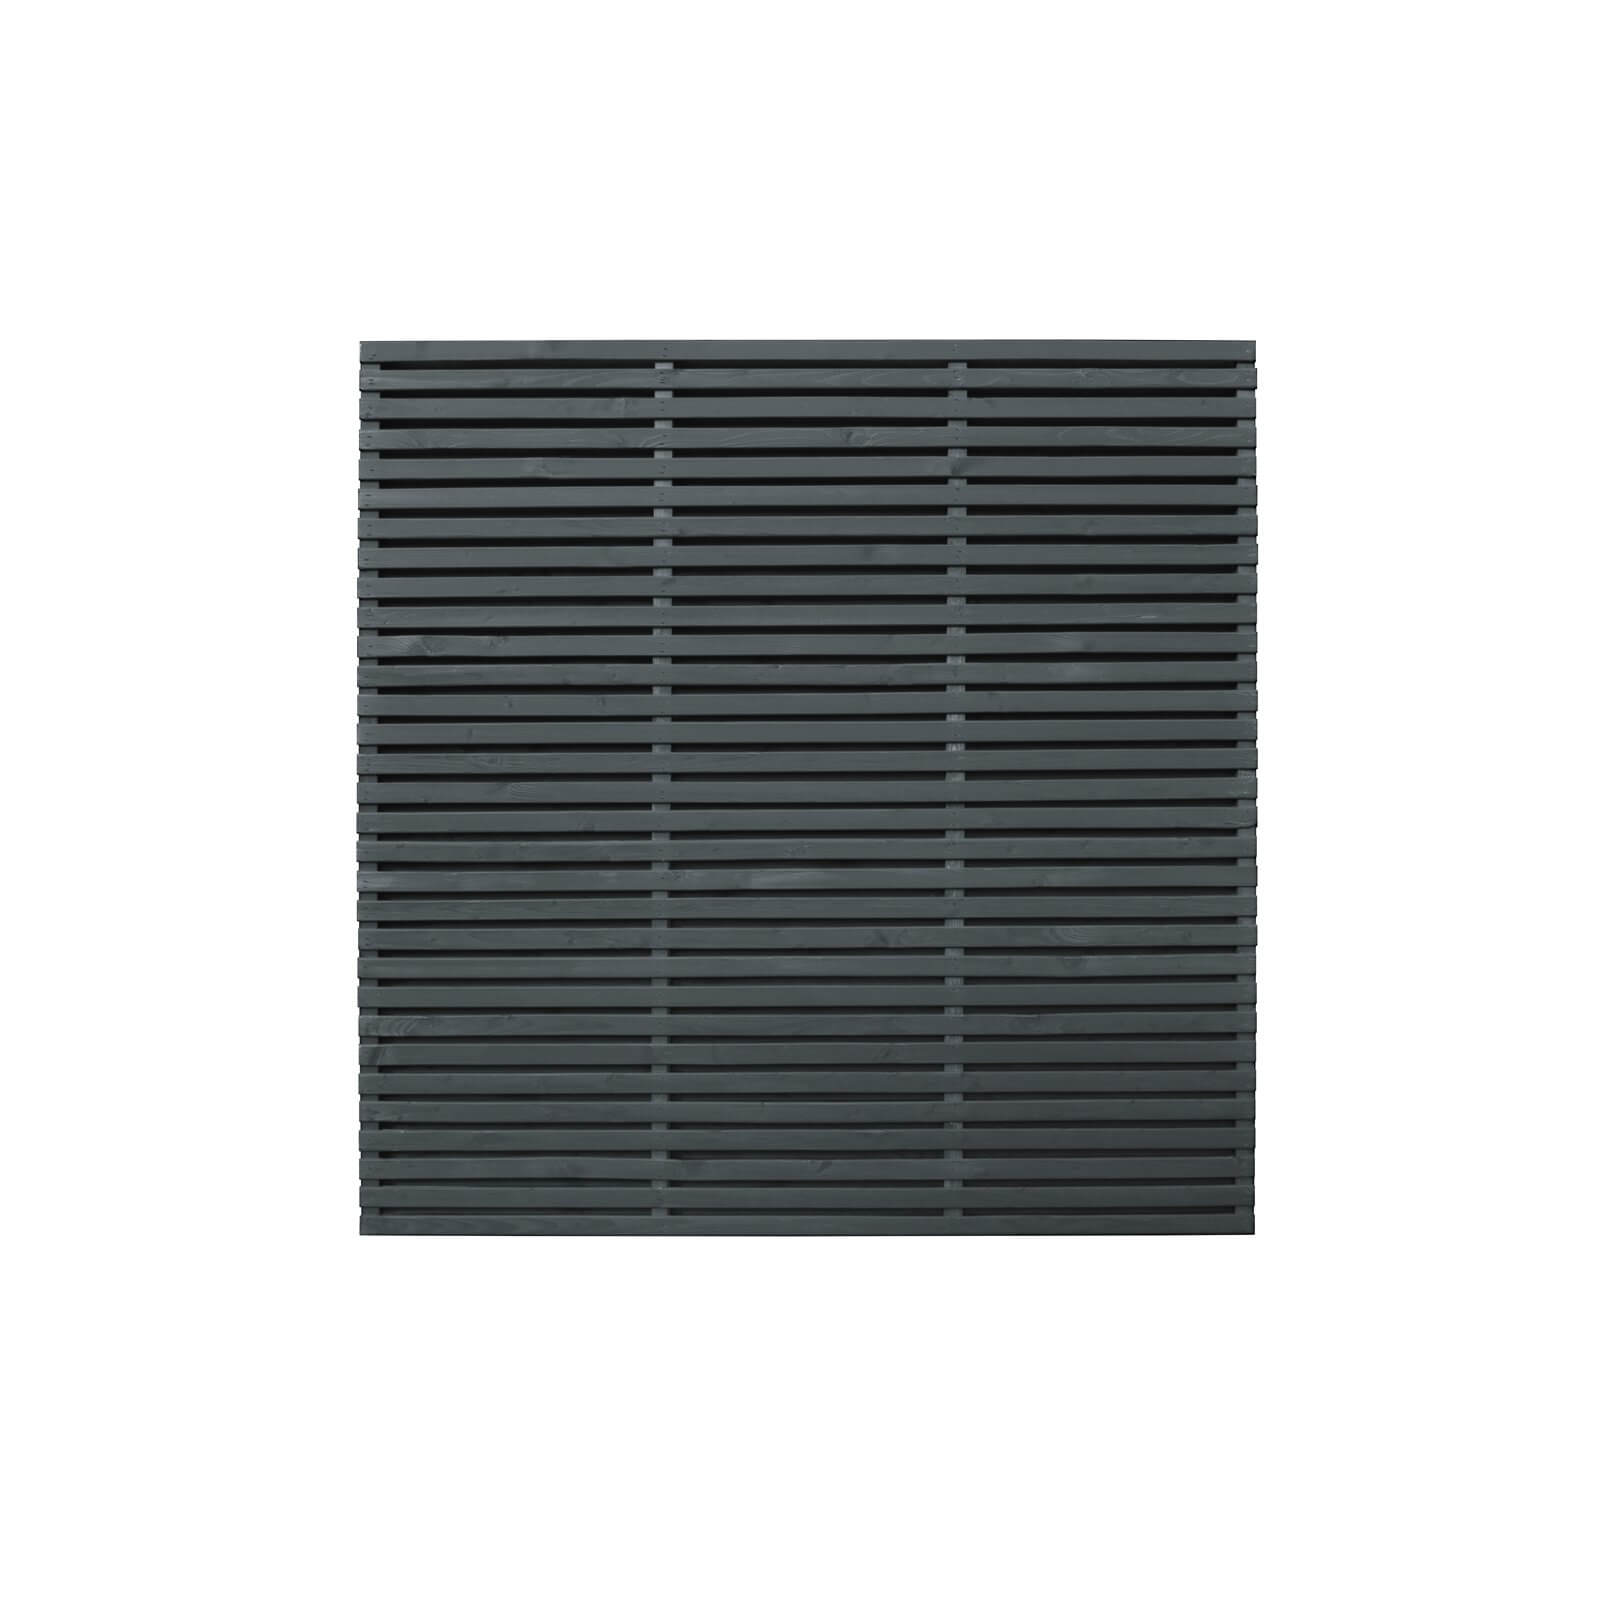 6ft x 6ft (1.8m x 1.8m) Grey Painted Contemporary Double Slatted Fence Panel - Pack of 3